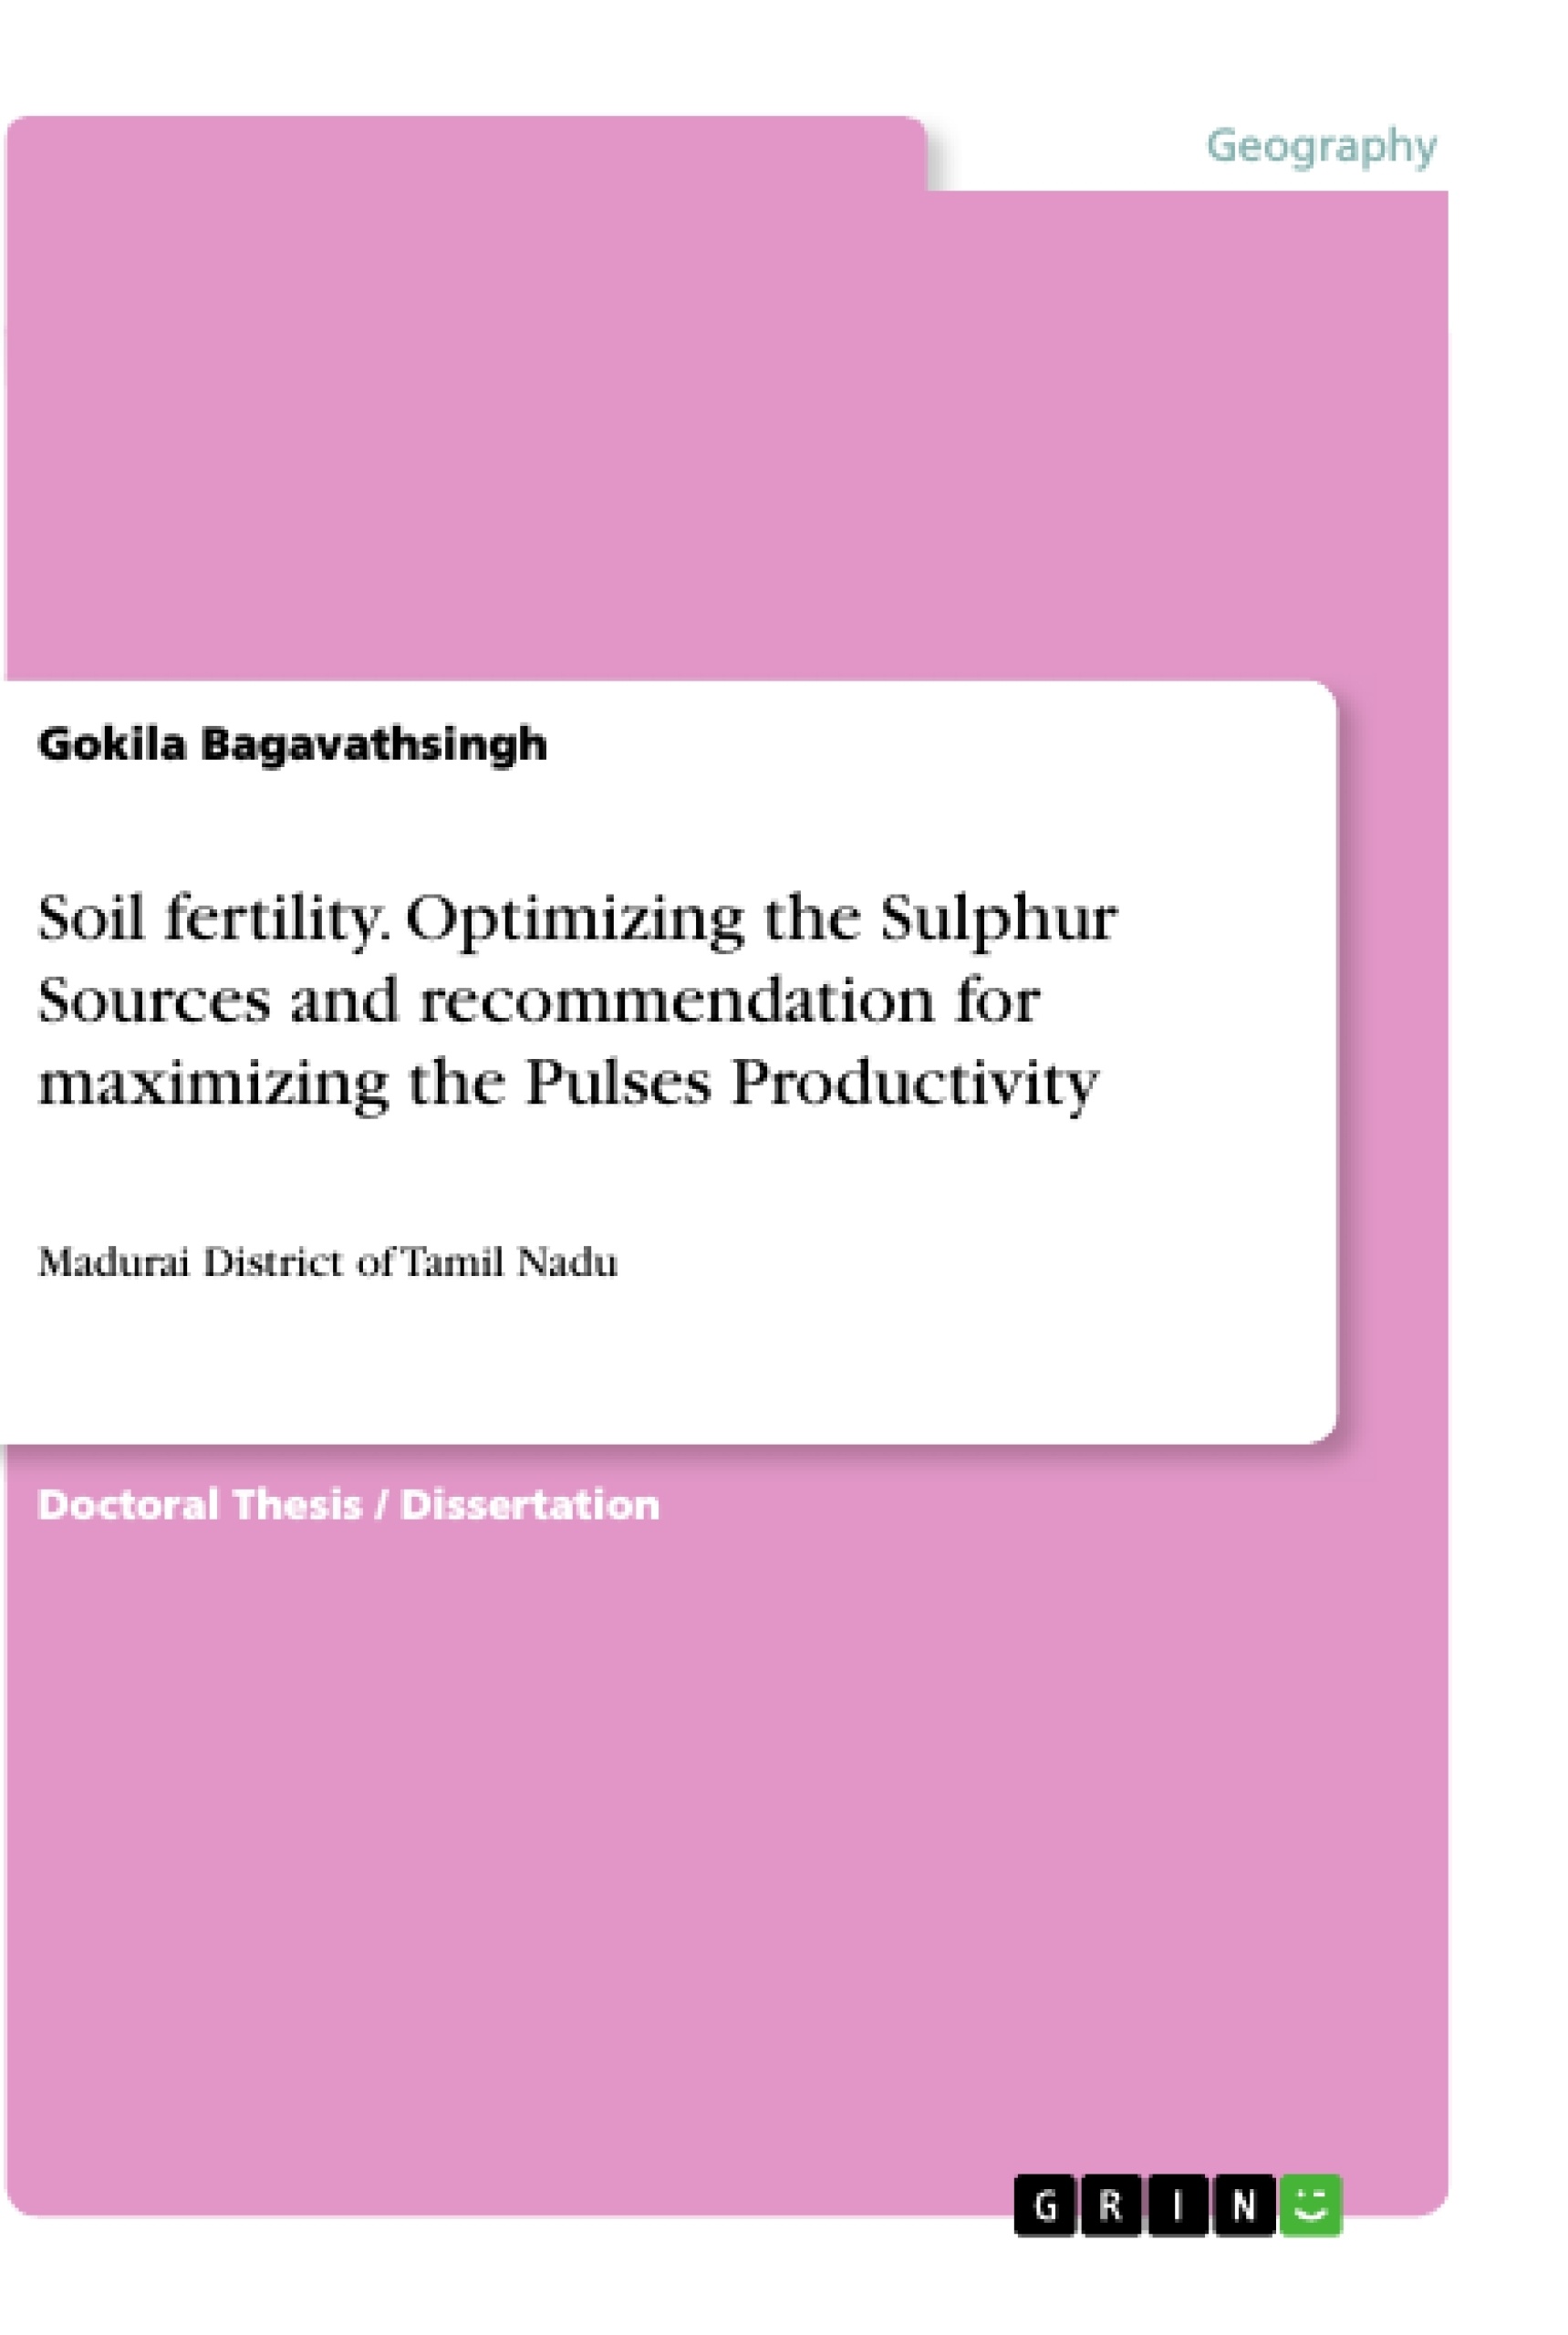 Titre: Soil fertility. Optimizing the Sulphur Sources and recommendation for maximizing the Pulses Productivity